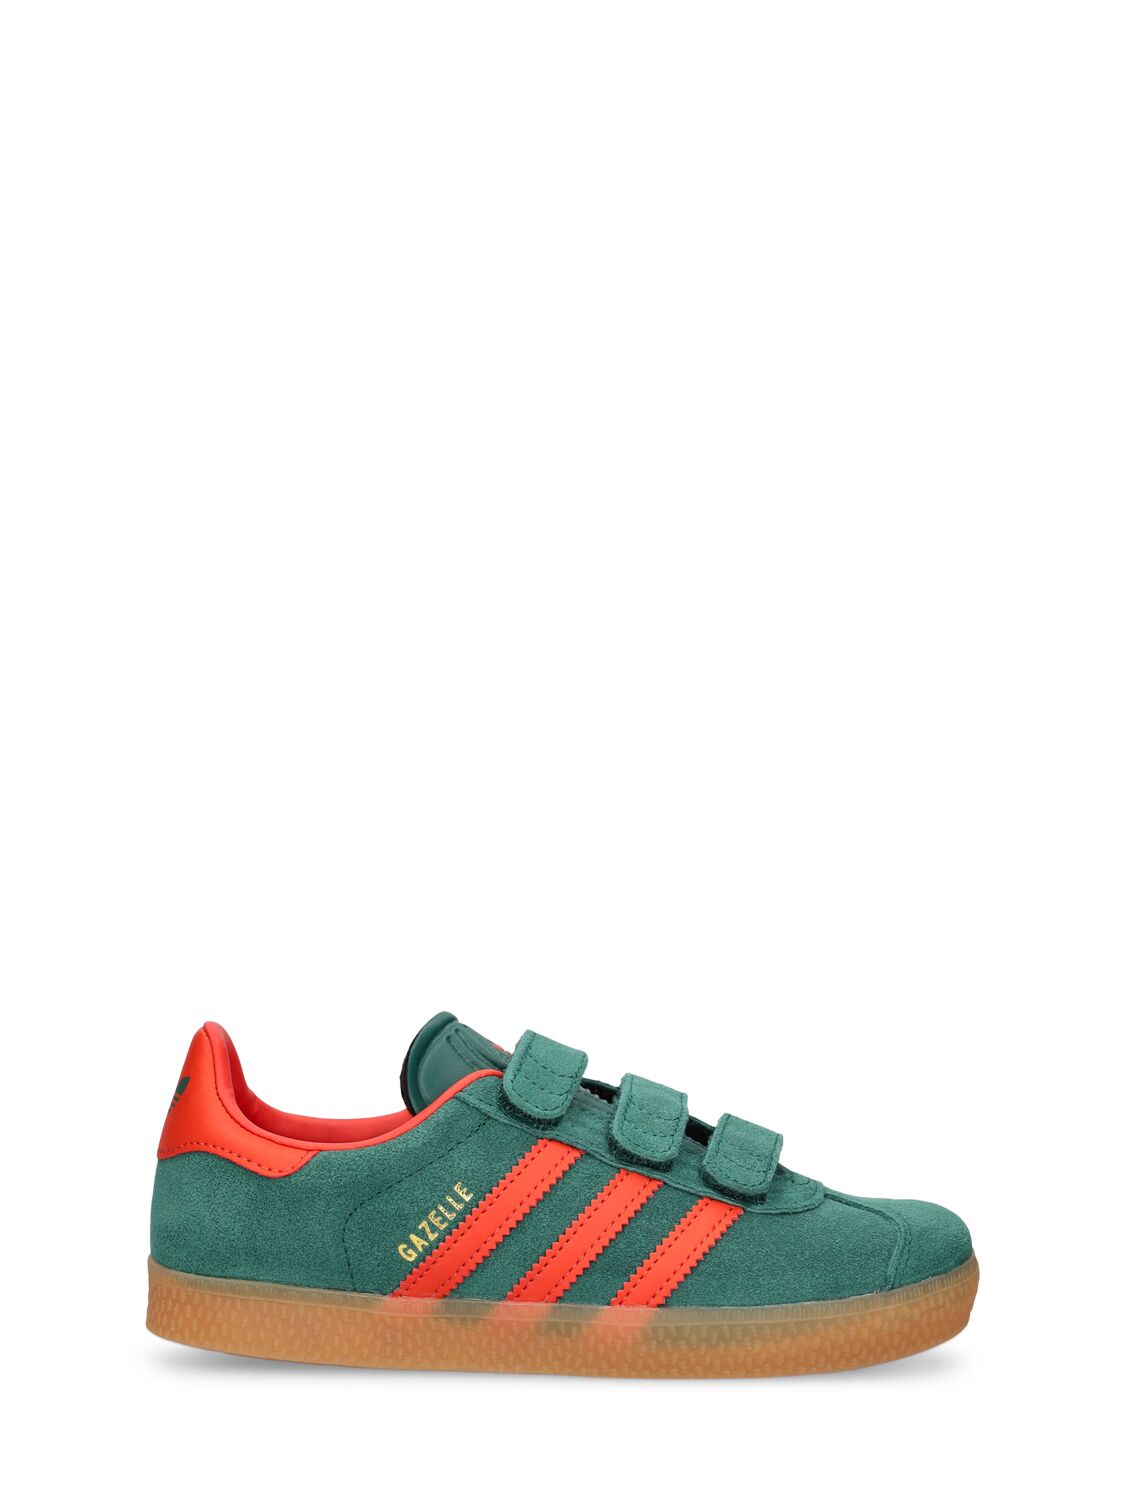 Image of Gazelle Suede Strap Sneakers